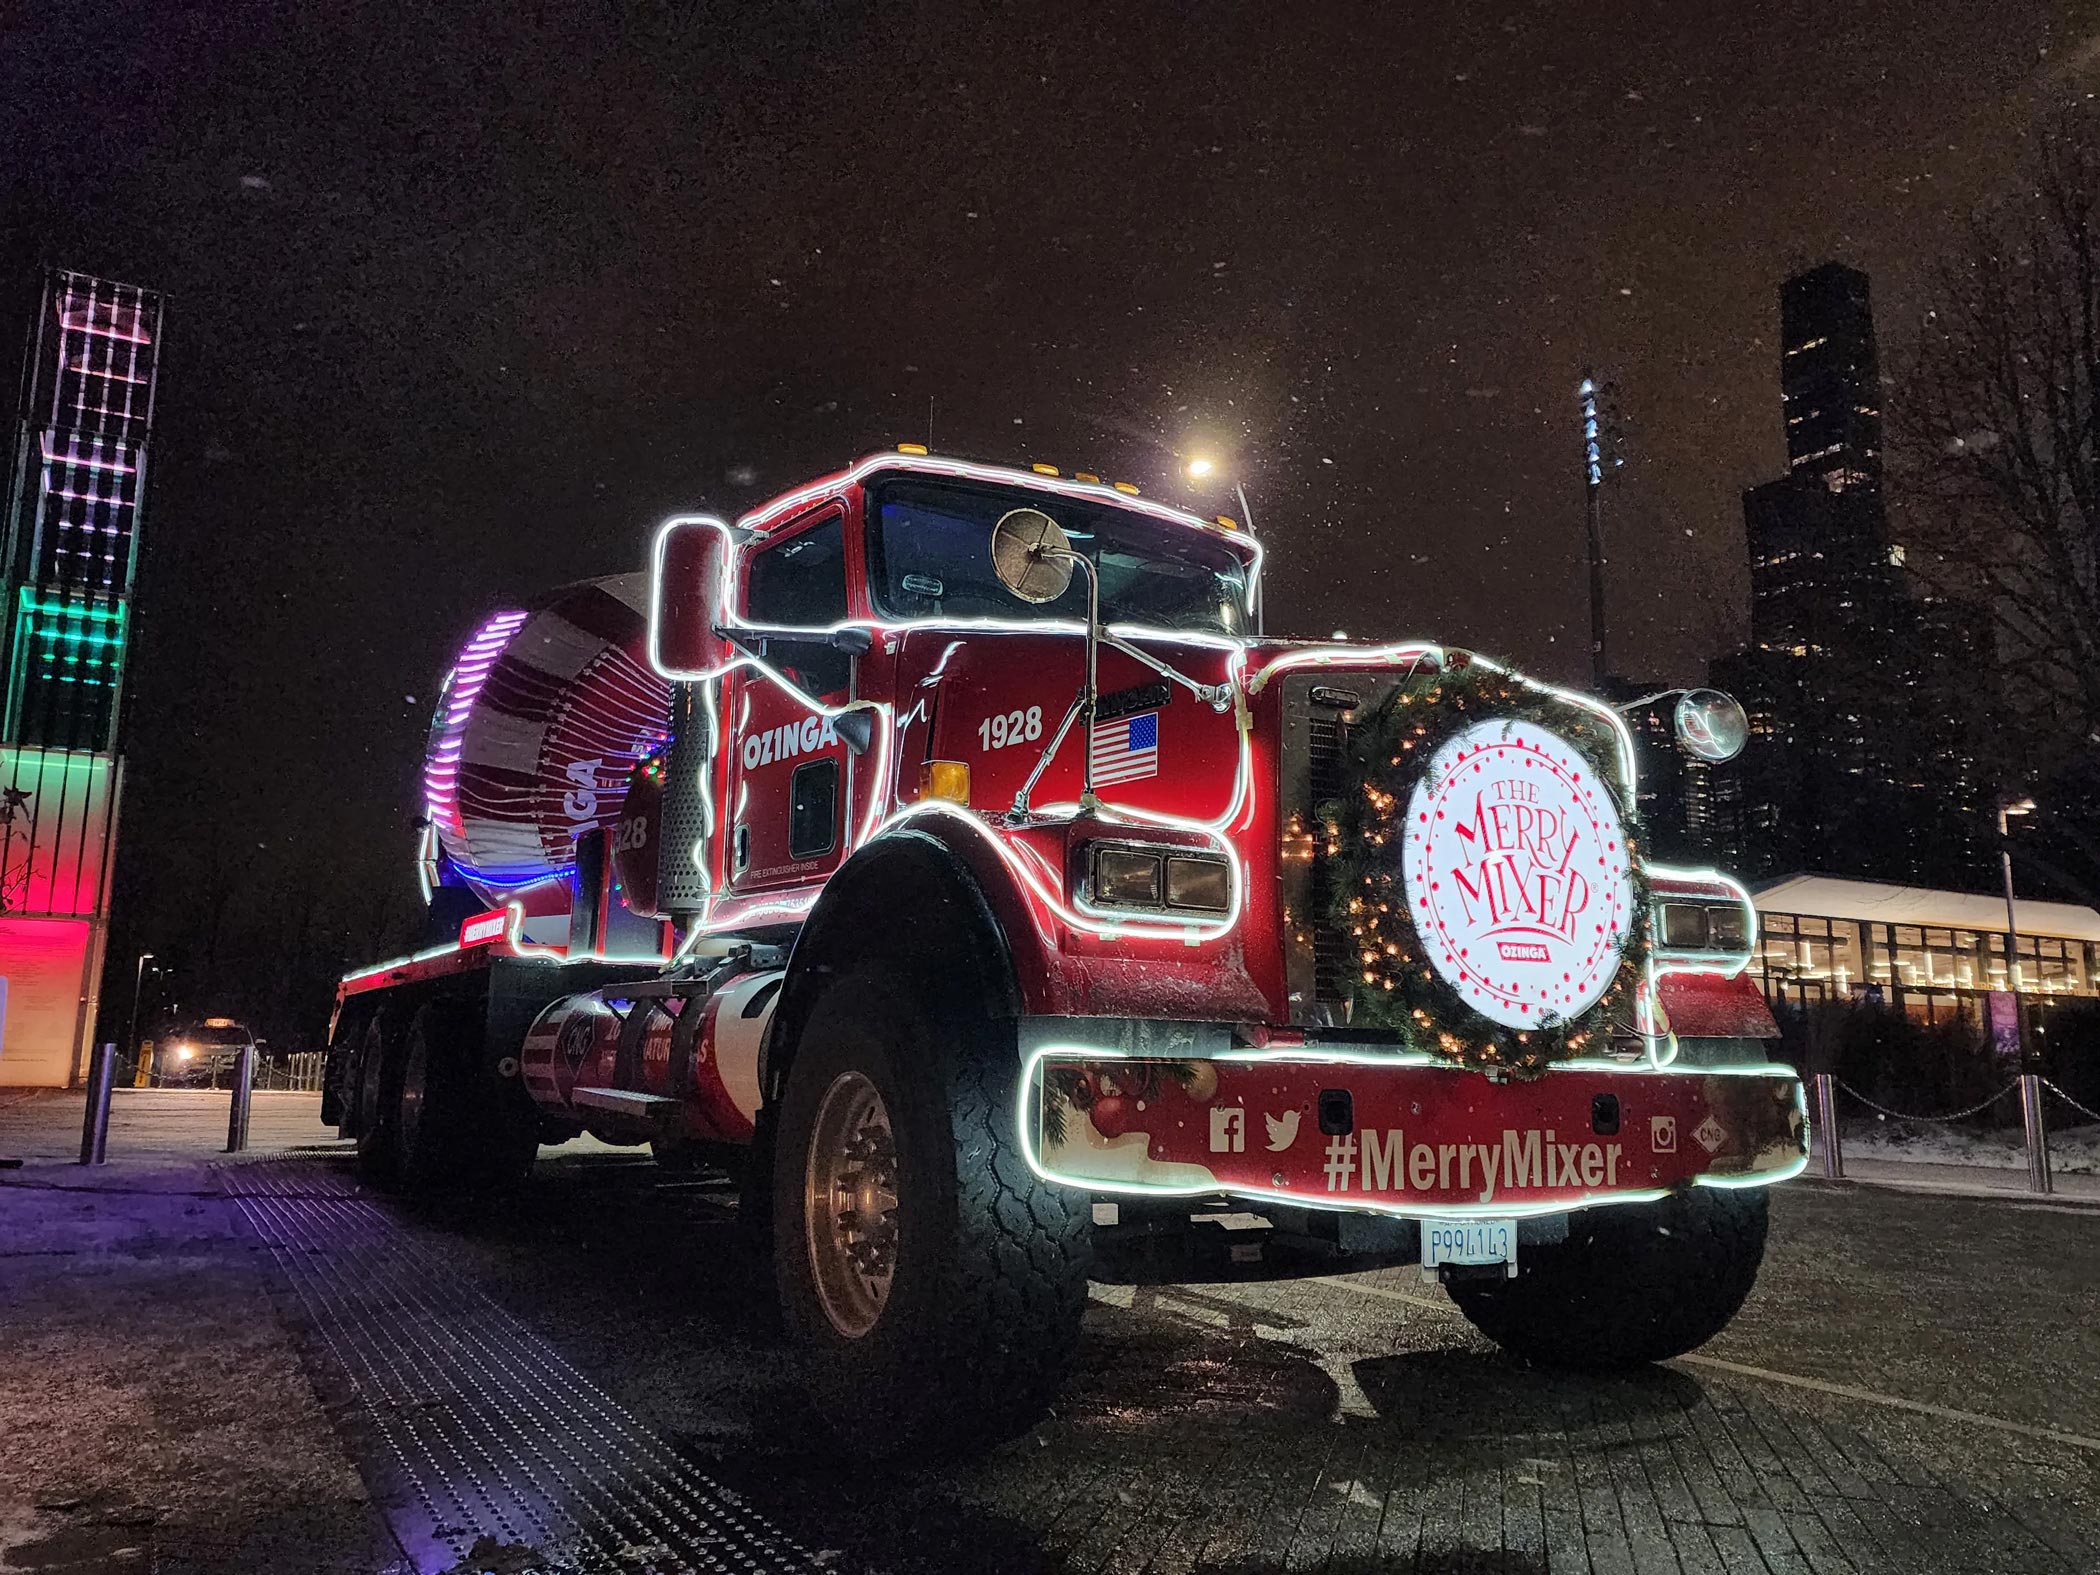 Coca-Cola Caravan, Ozinga Holiday Truck & Holiday Workshops Come to Navy Pier this Weekend